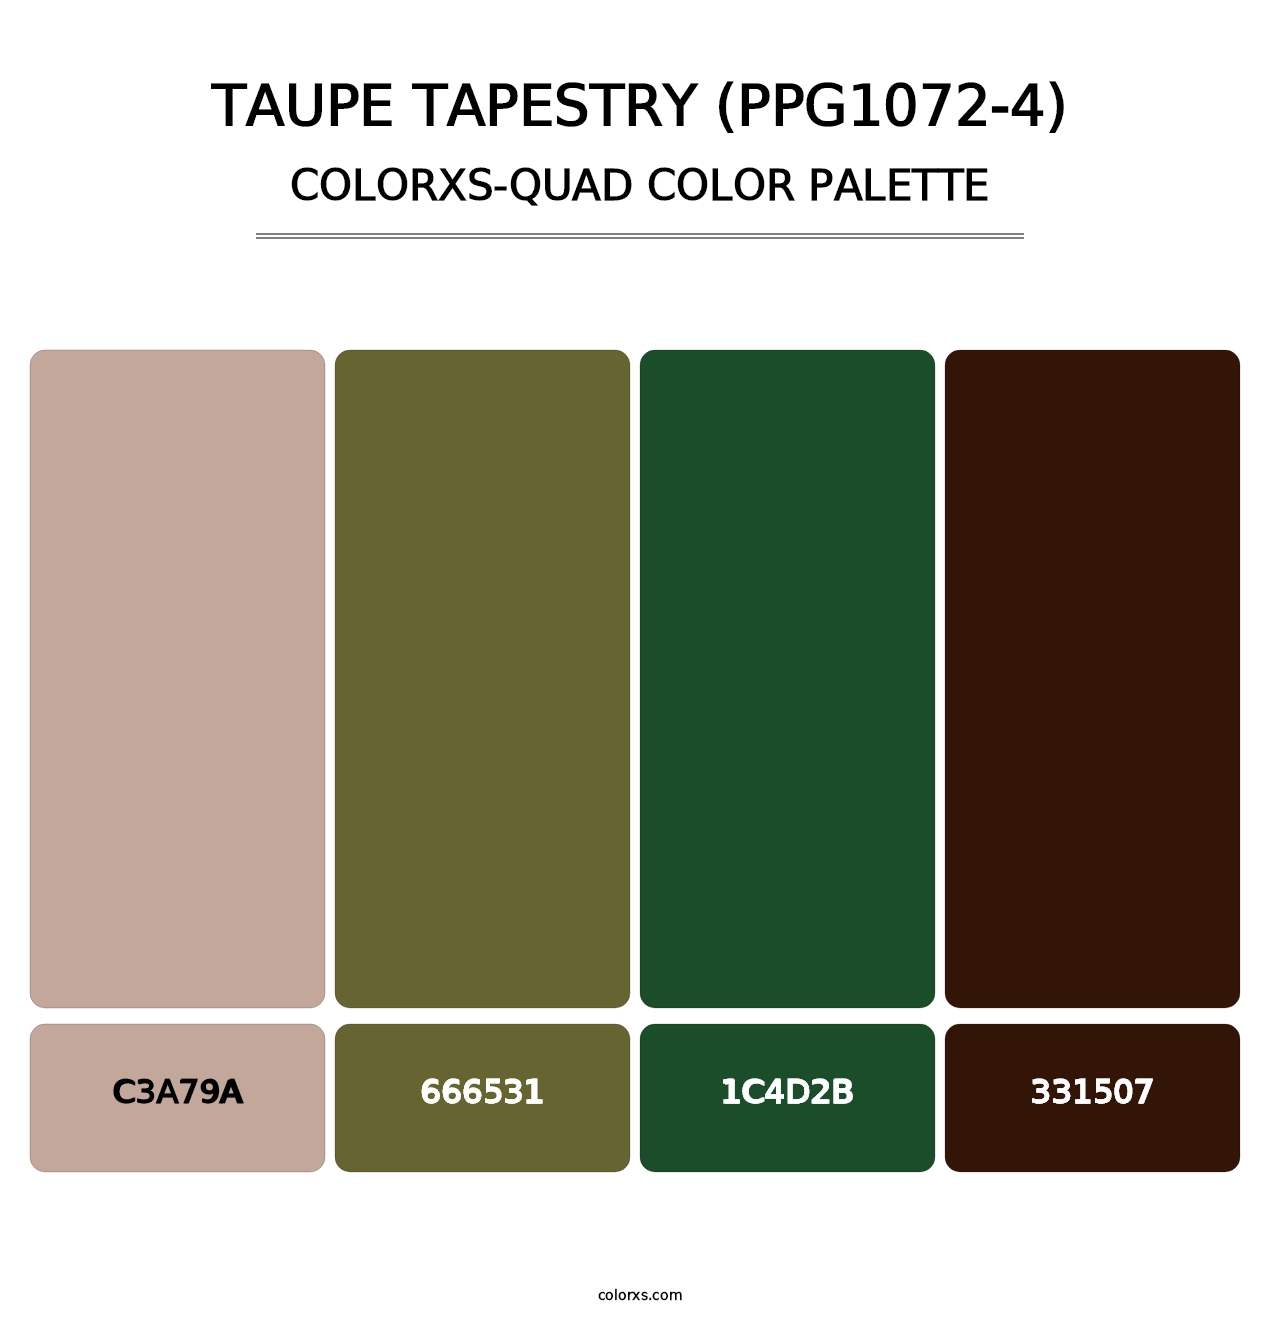 Taupe Tapestry (PPG1072-4) - Colorxs Quad Palette